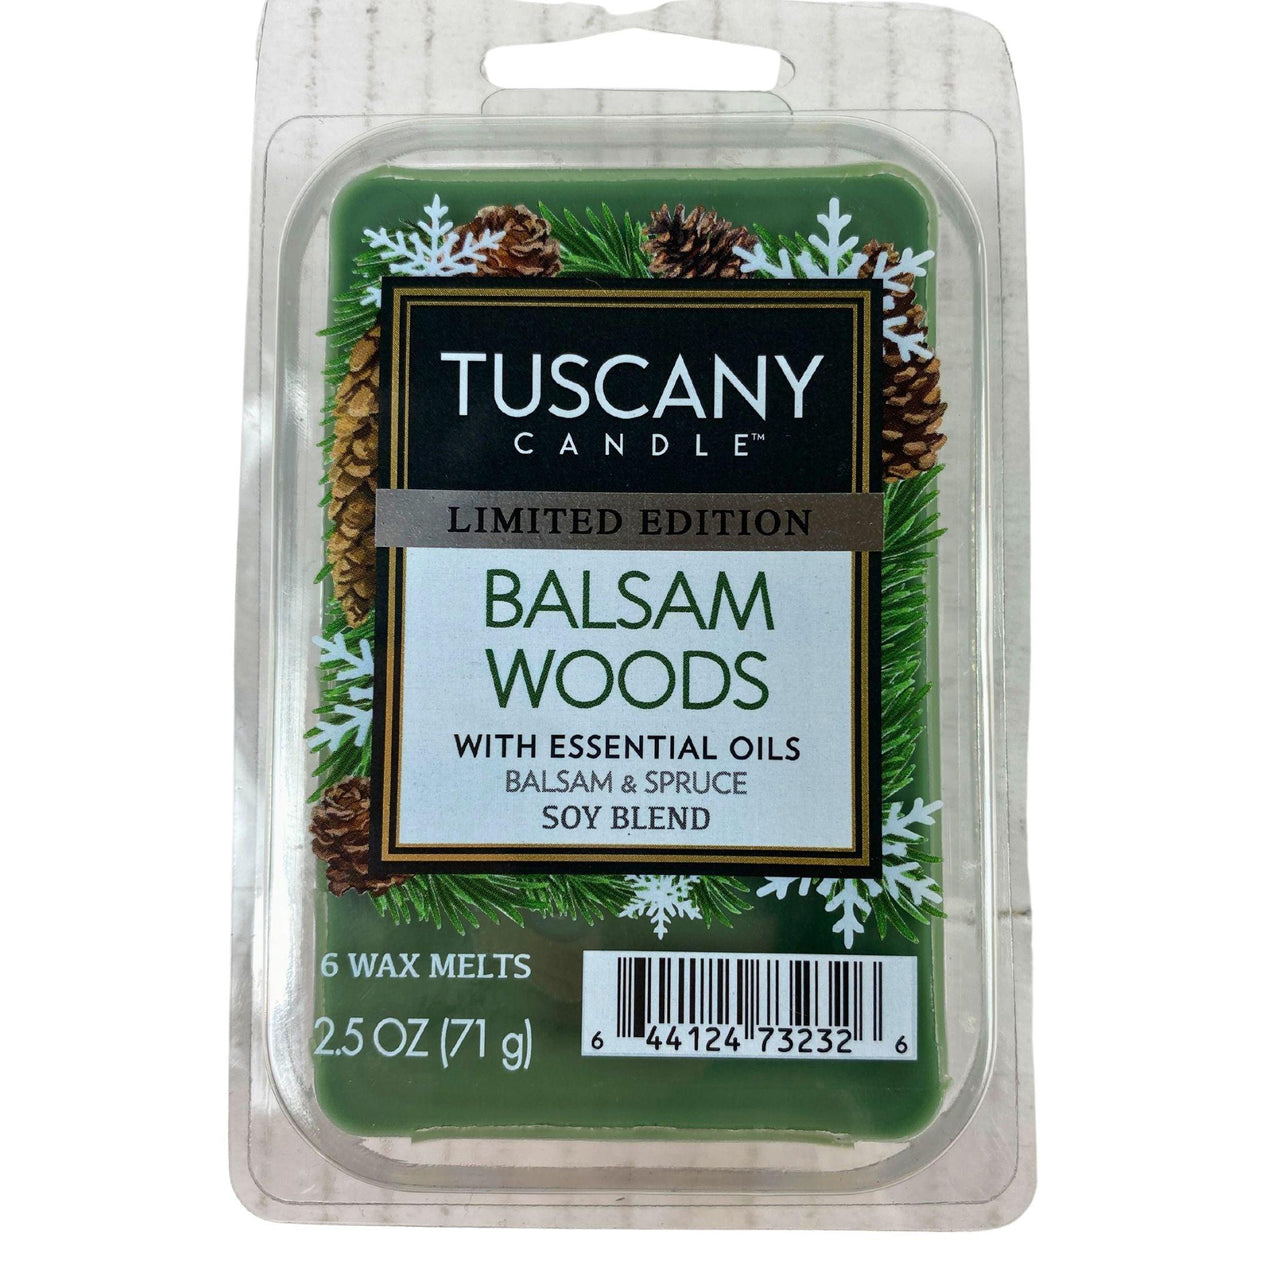 Tuscany Candle Limited Edition Balsam Woods with Essential Oils Balsam & Spruce Soy Blend 6 wax melts 2.5OZ (100 Pcs Lot) - Discount Wholesalers Inc